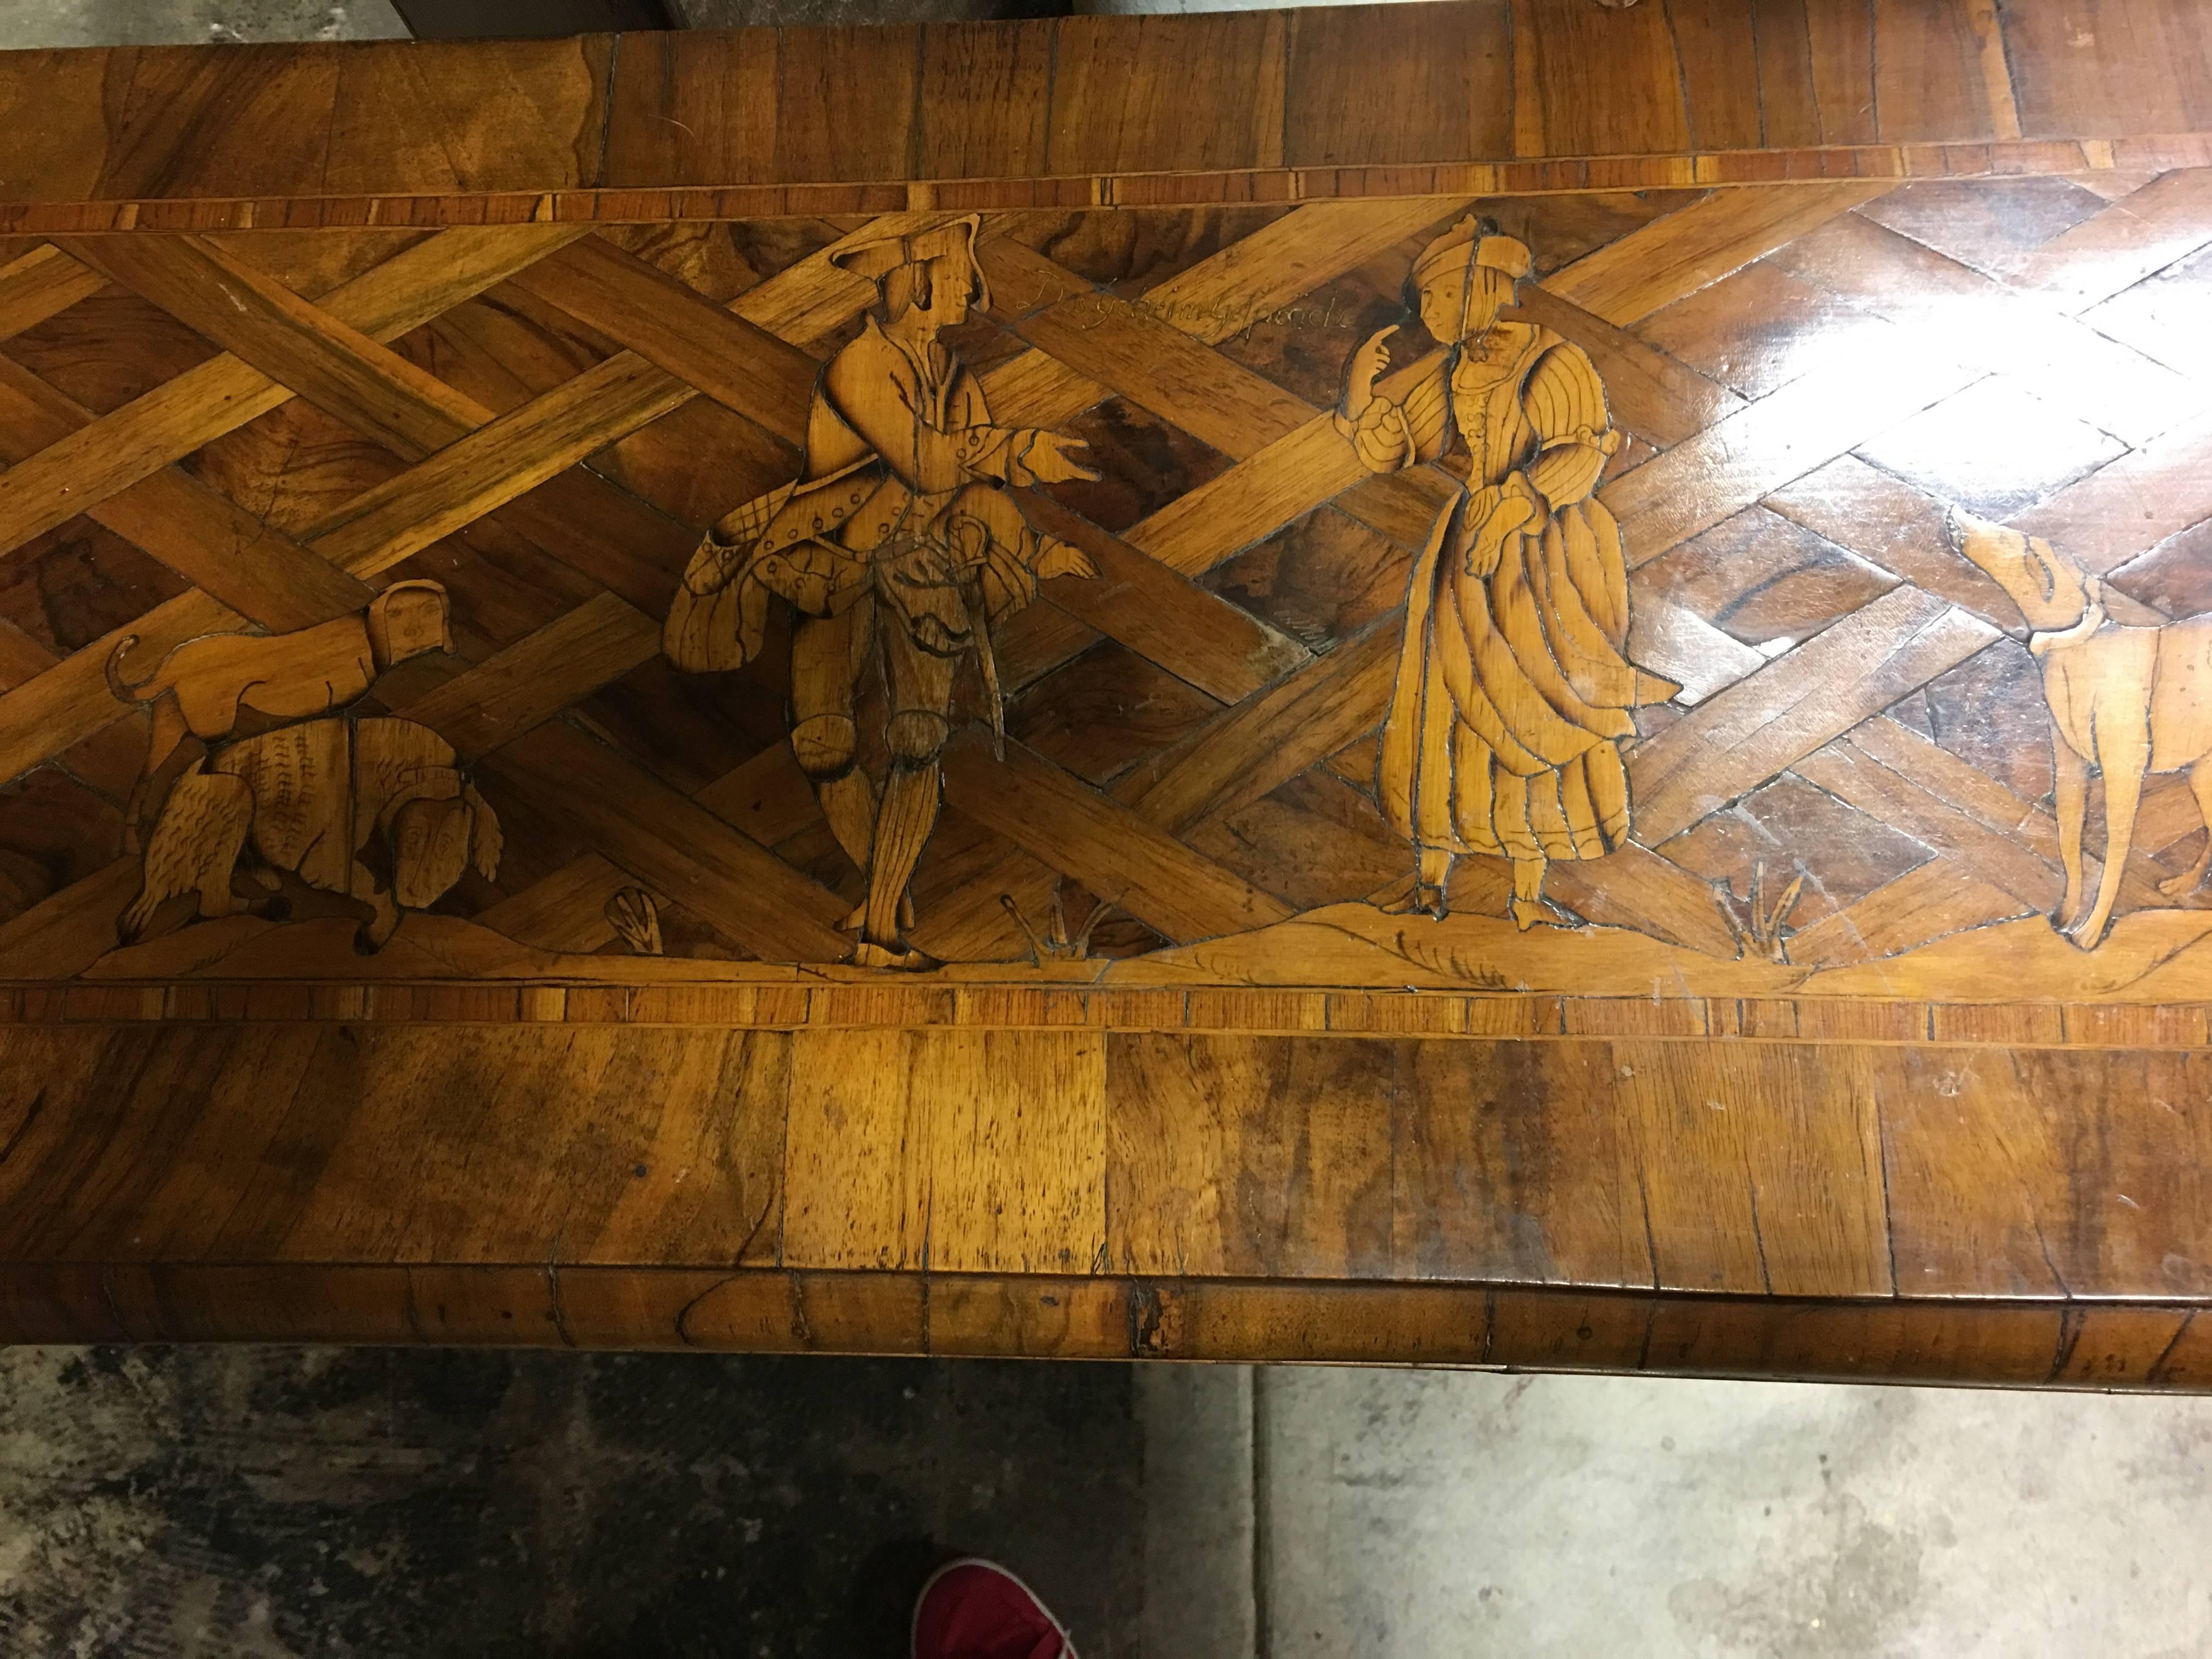 Signed 18th century German parquetry game table superb craftsmanship
Measures: 39.5” W x 16.5” D x 29.5” H closed
39.5” W x 32.5” D x 28.5” H.